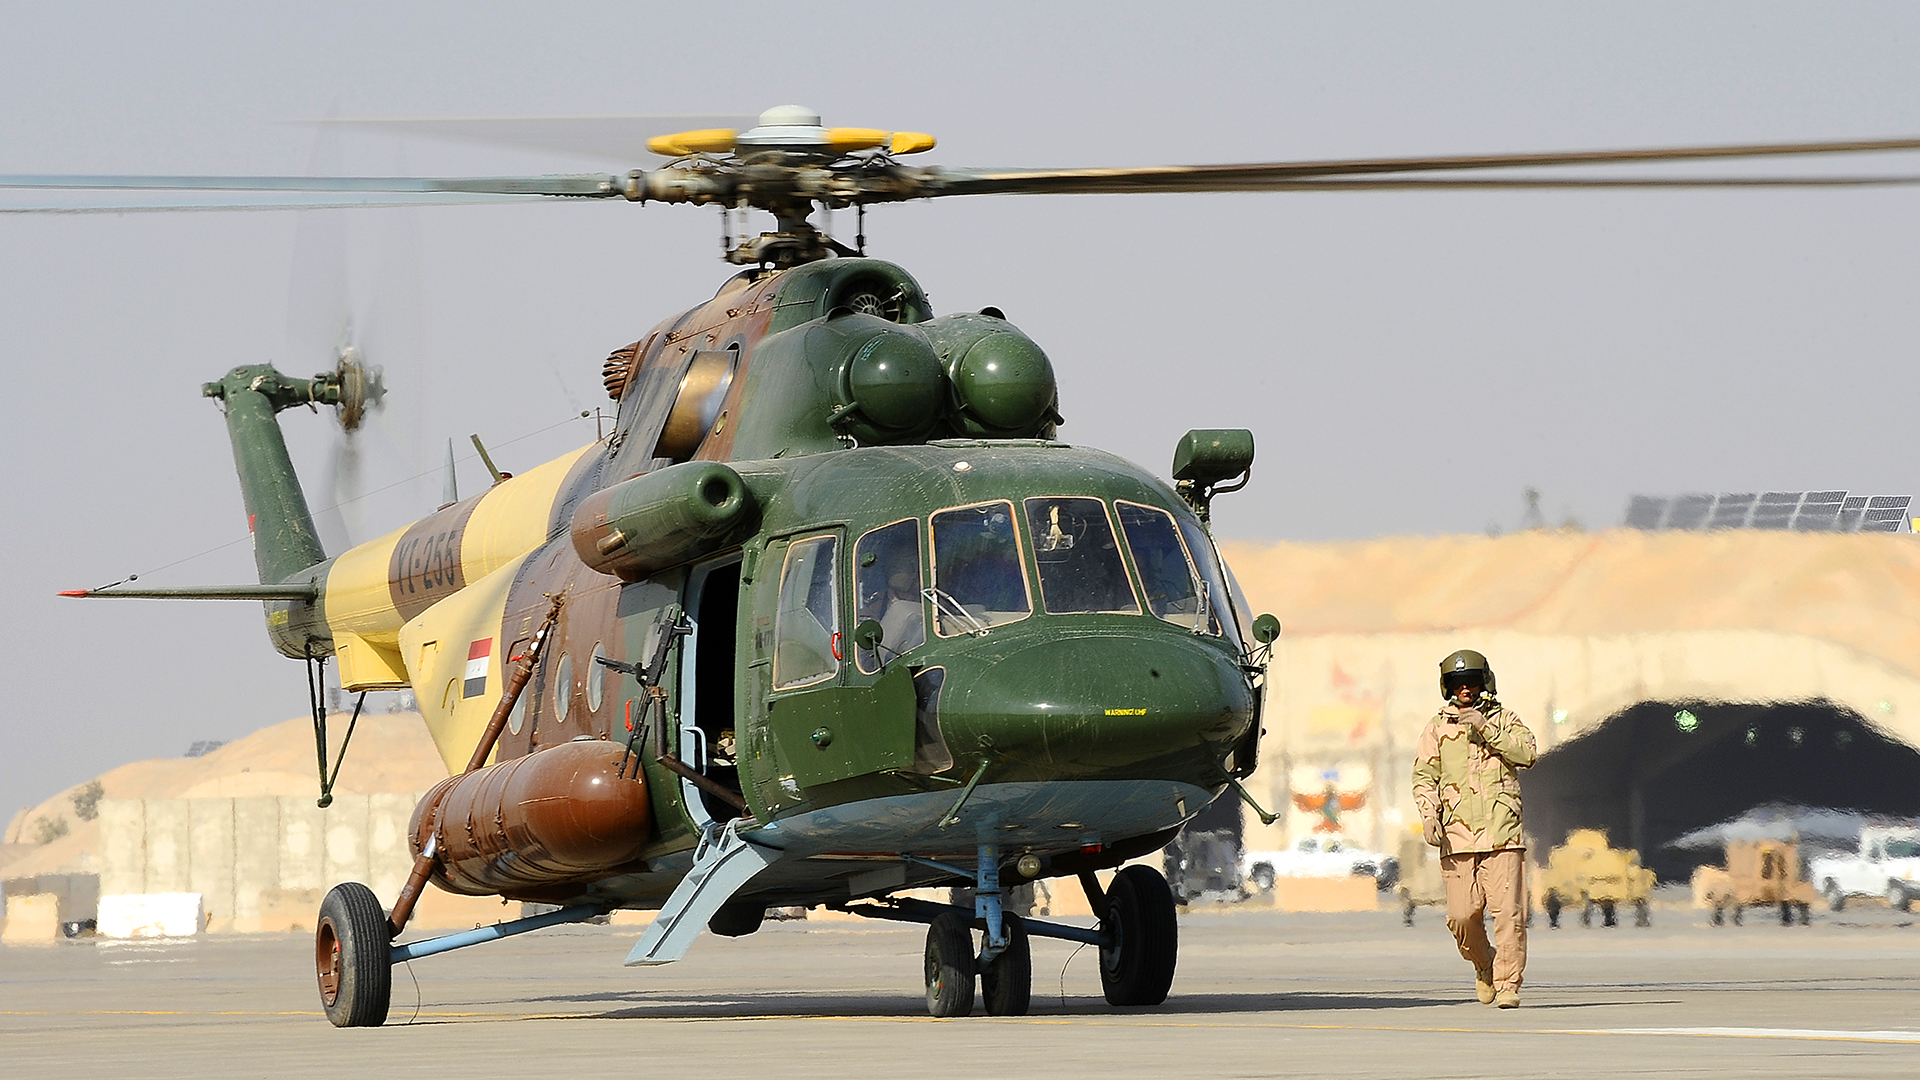 Iraq Wants To Ditch Russian Mi-17s For U.S. Helicopters Over Ukraine War-Induced Parts Shortage